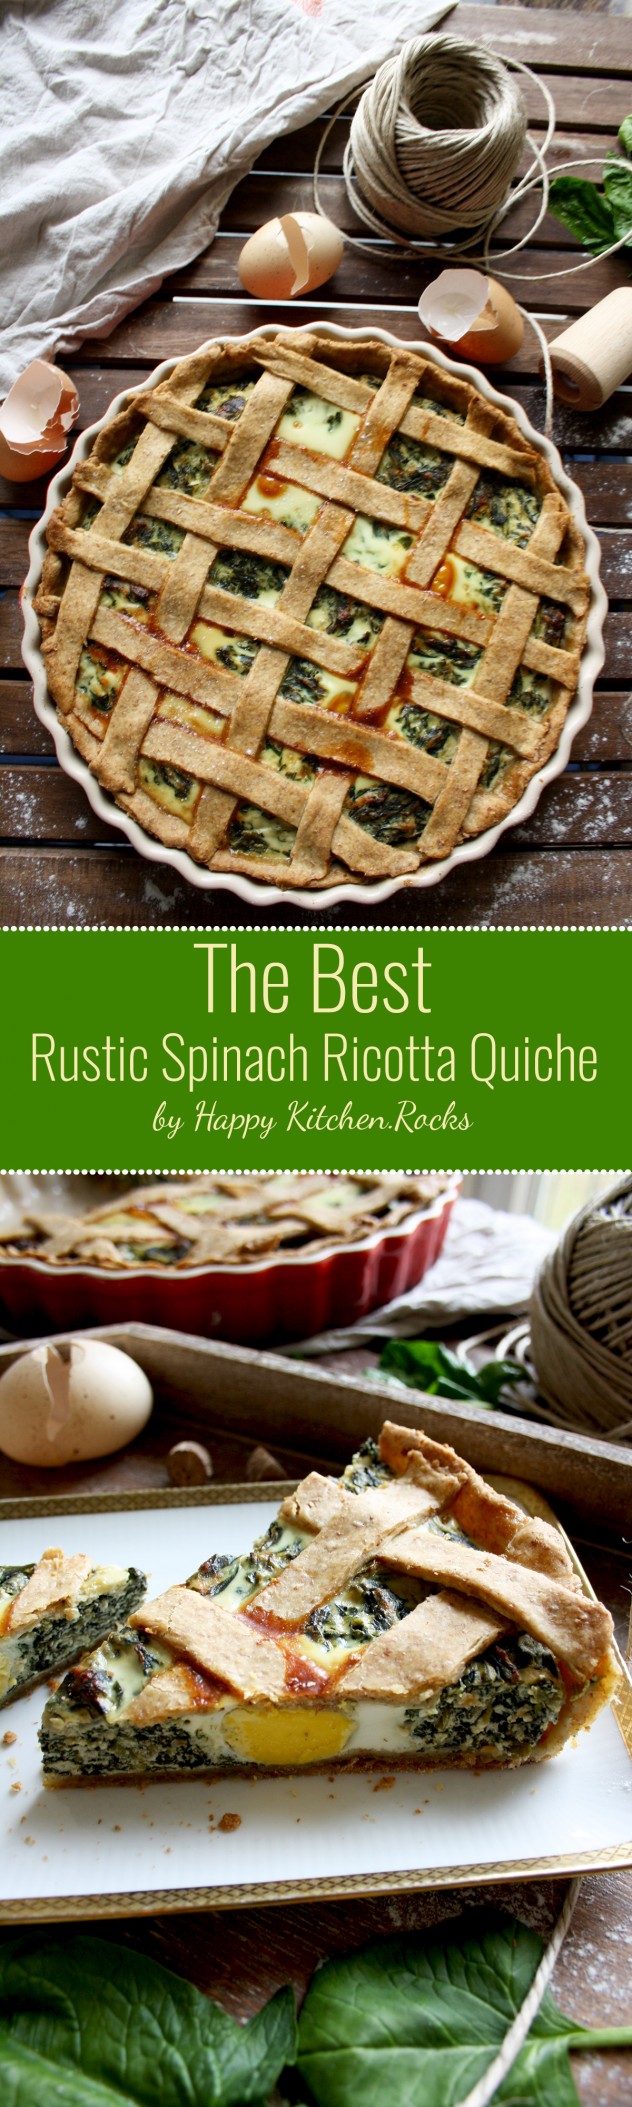 The Best Rustic Ricotta Spinach Quiche: Easy and healthy 1-hour recipe of the best ever spinach quiche with whole wheat crust and creamy spinach ricotta filling.